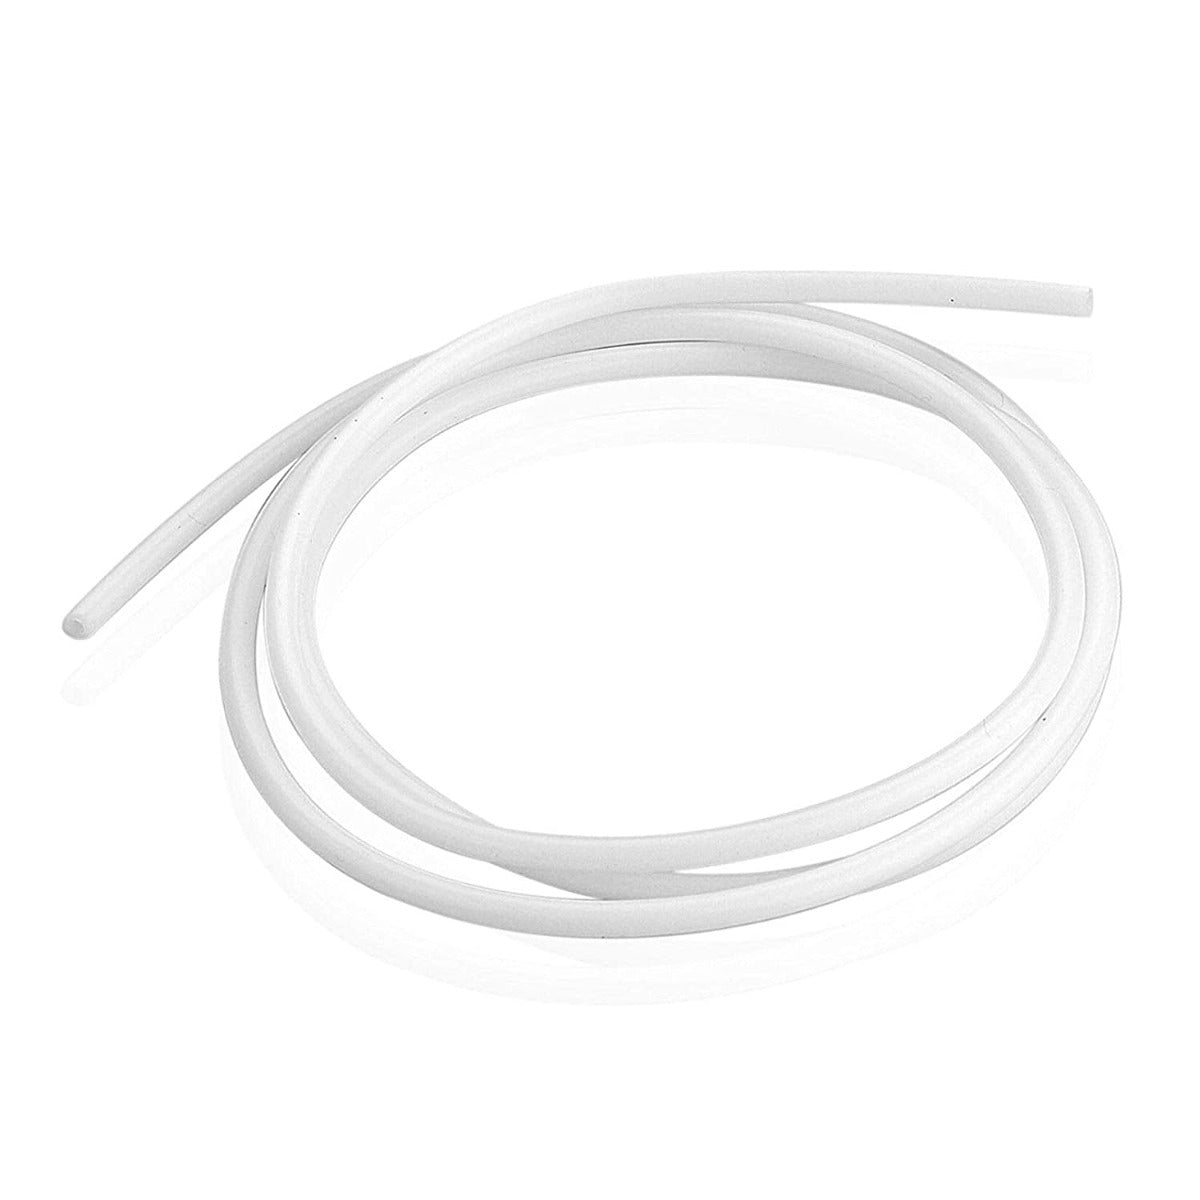 PTFE Bowden tube - 1.75mm - 60 cm. (possibility of longer)